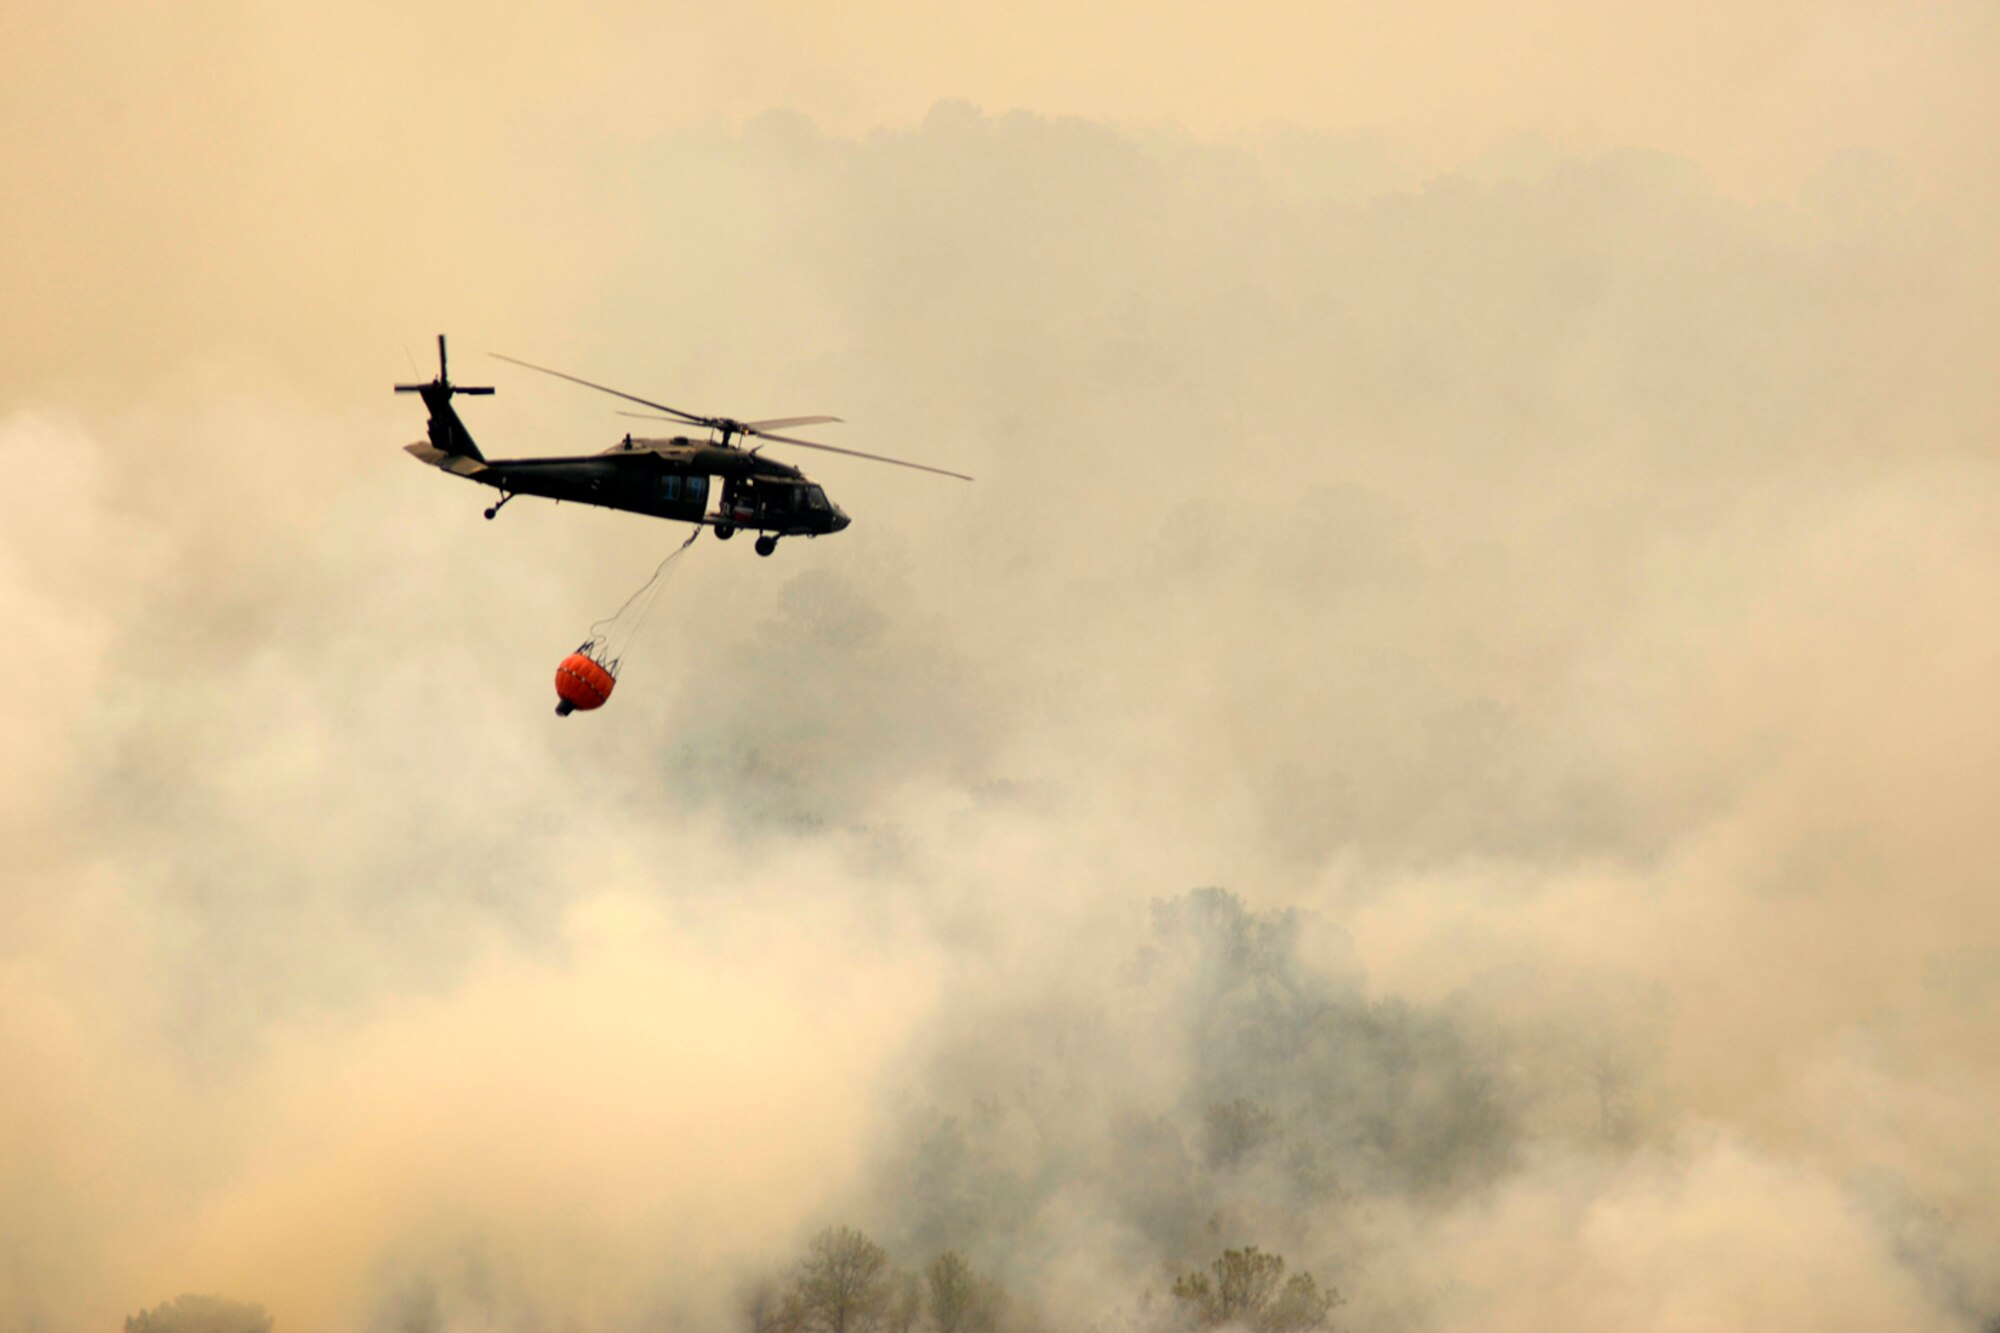 SPREADING LIKE WILDFIRE - A Texas National Guard CH-46 Blackhawk flies right into the smoke to dump its water over the wild fire. Texas National Guard crews launched out of the Austin Army Aviation Facility to fight wild fires threatening homes and property near Bastrop, Texas, September 6, 2011. (Photo by Staff Sgt. Malcolm McClendon)